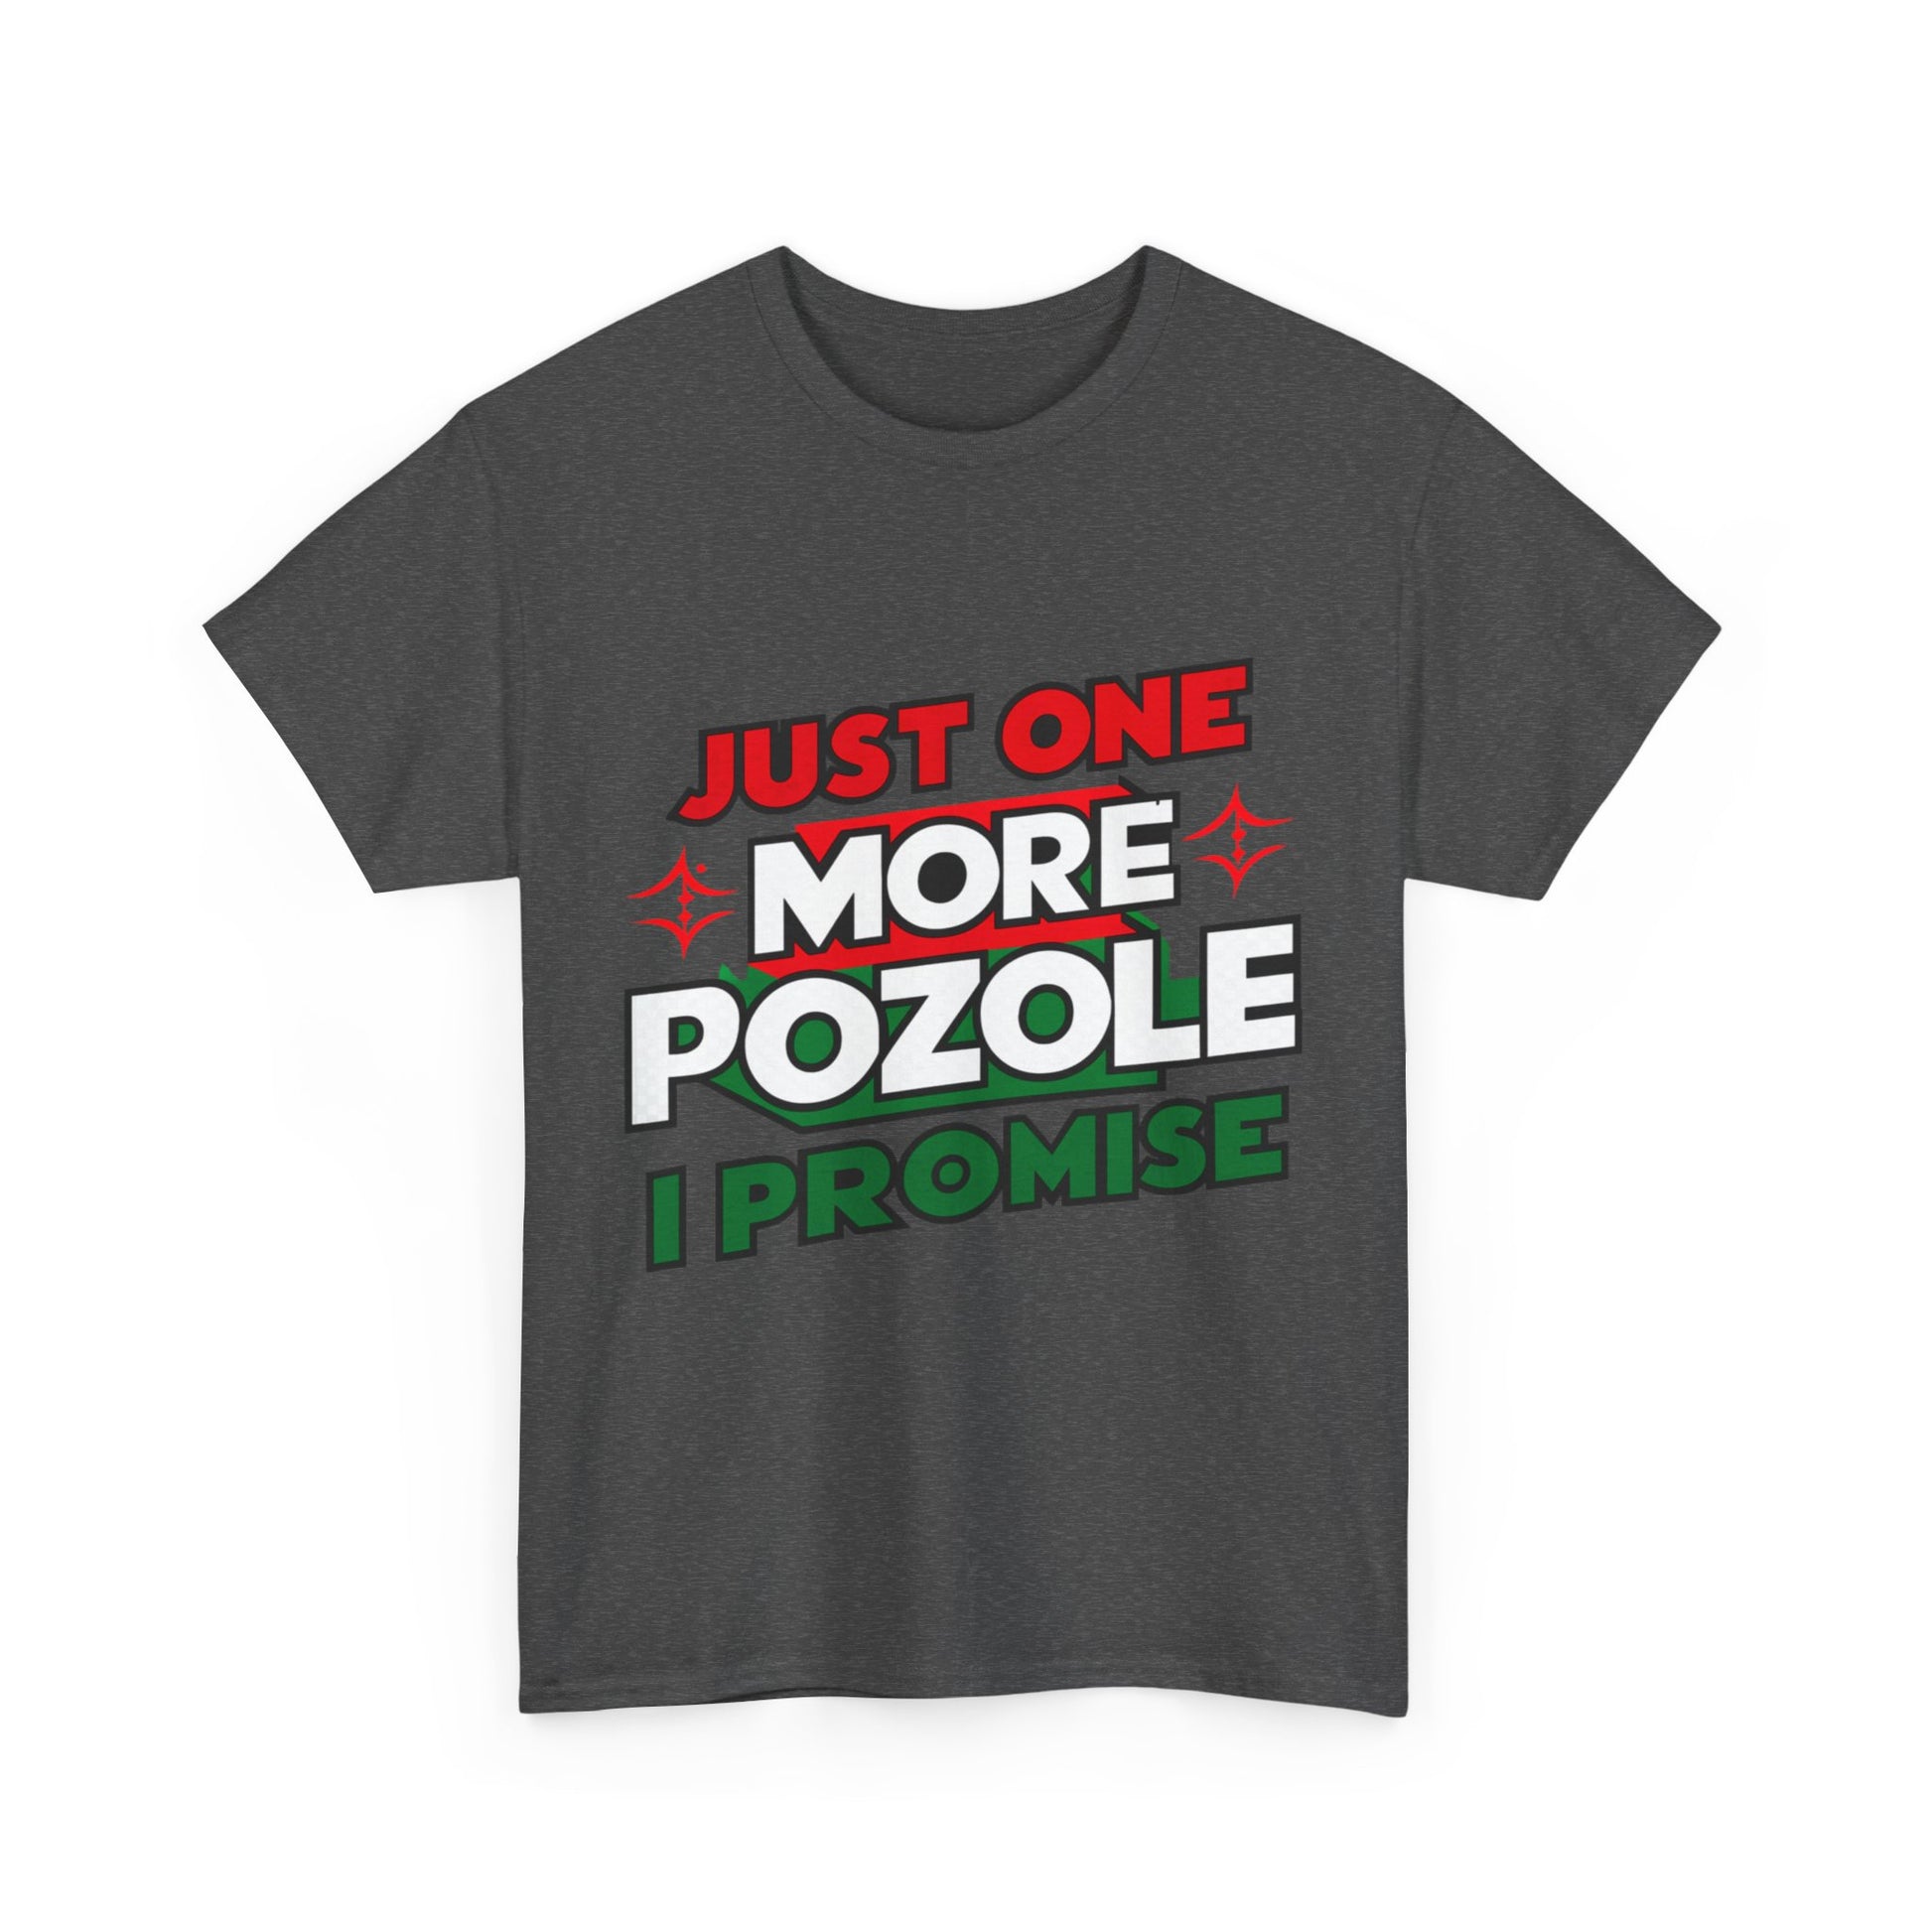 Just One More Pozole I Promise Mexican Food Graphic Unisex Heavy Cotton Tee Cotton Funny Humorous Graphic Soft Premium Unisex Men Women Dark Heather T-shirt Birthday Gift-24